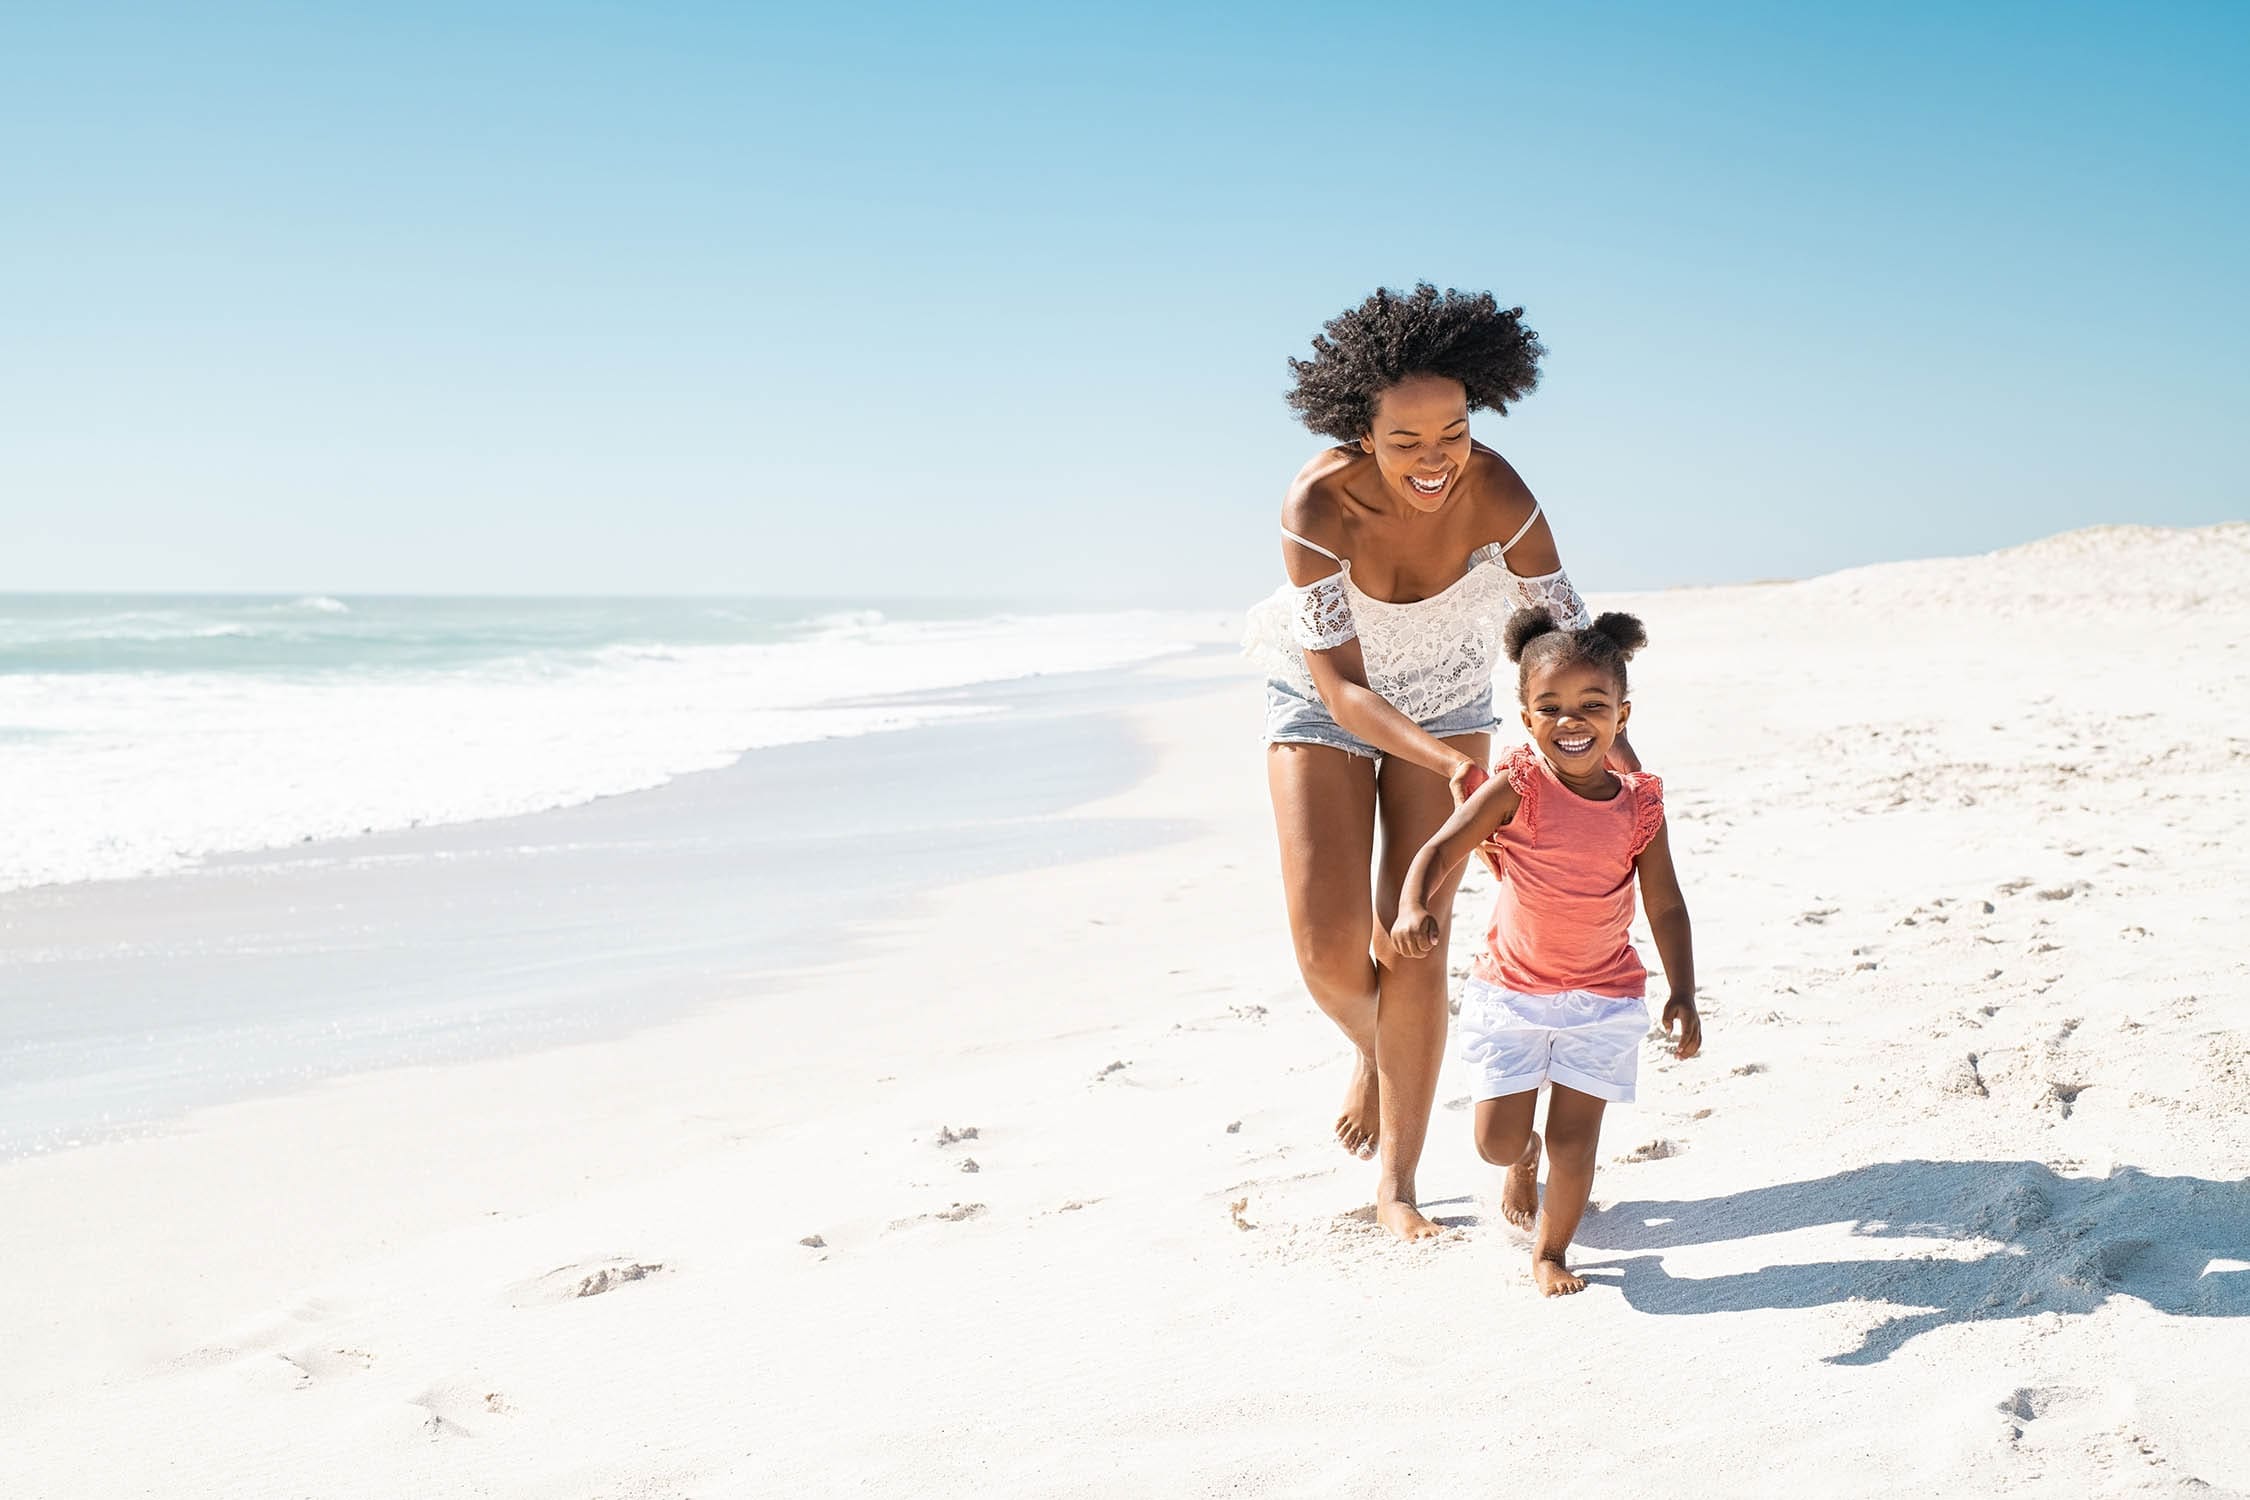 Your hospitality seo tactics should highlight your family-friendly appeal with an image that exudes joyful activities and sunshine at your resort.